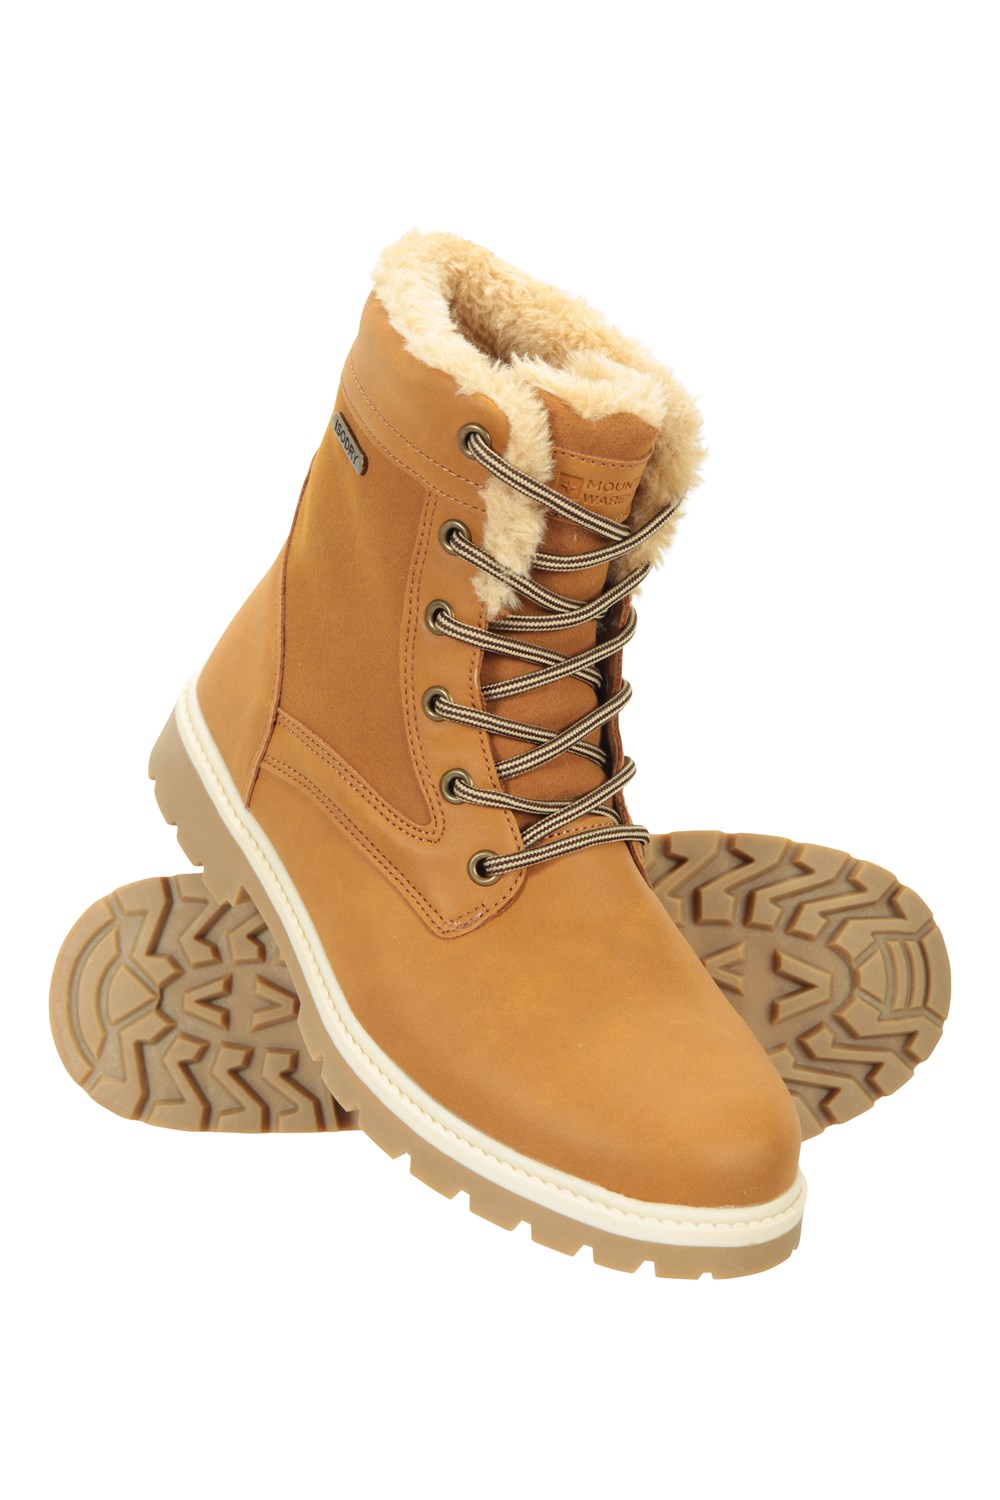 Mountain Warehouse Womens Boots Waterproof Ladies Casual Faux Fur Hiking Shoes